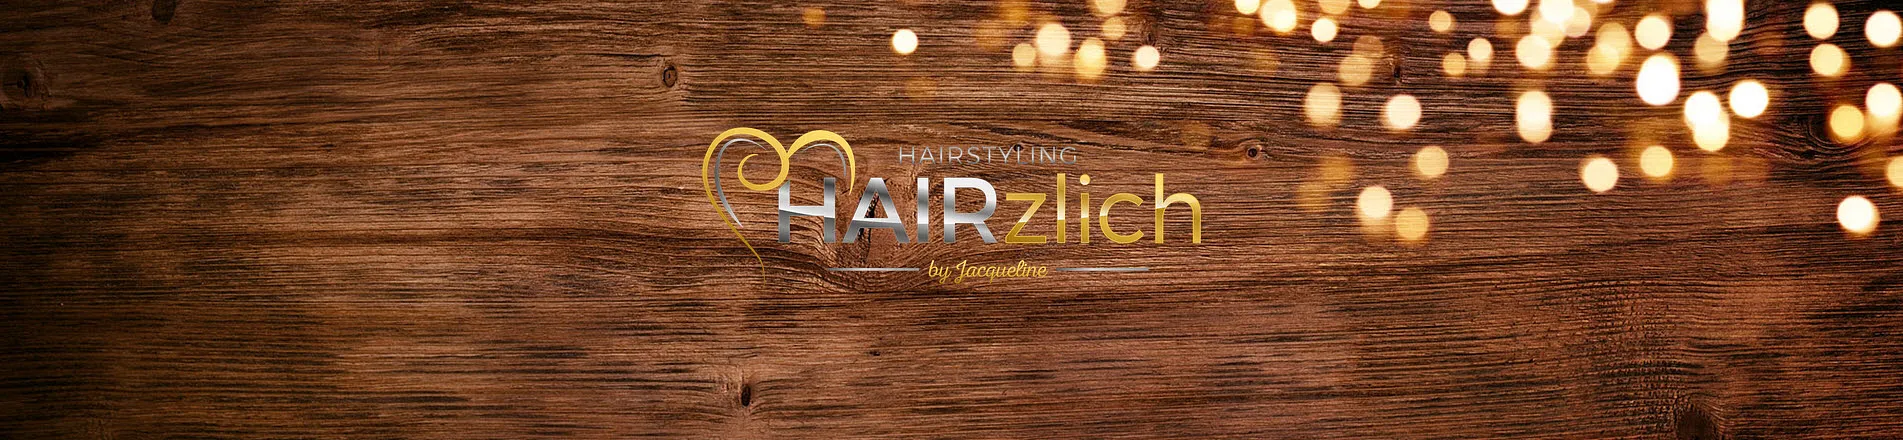 Coiffeur HAIRzlich, Hairstyling by Jacqueline